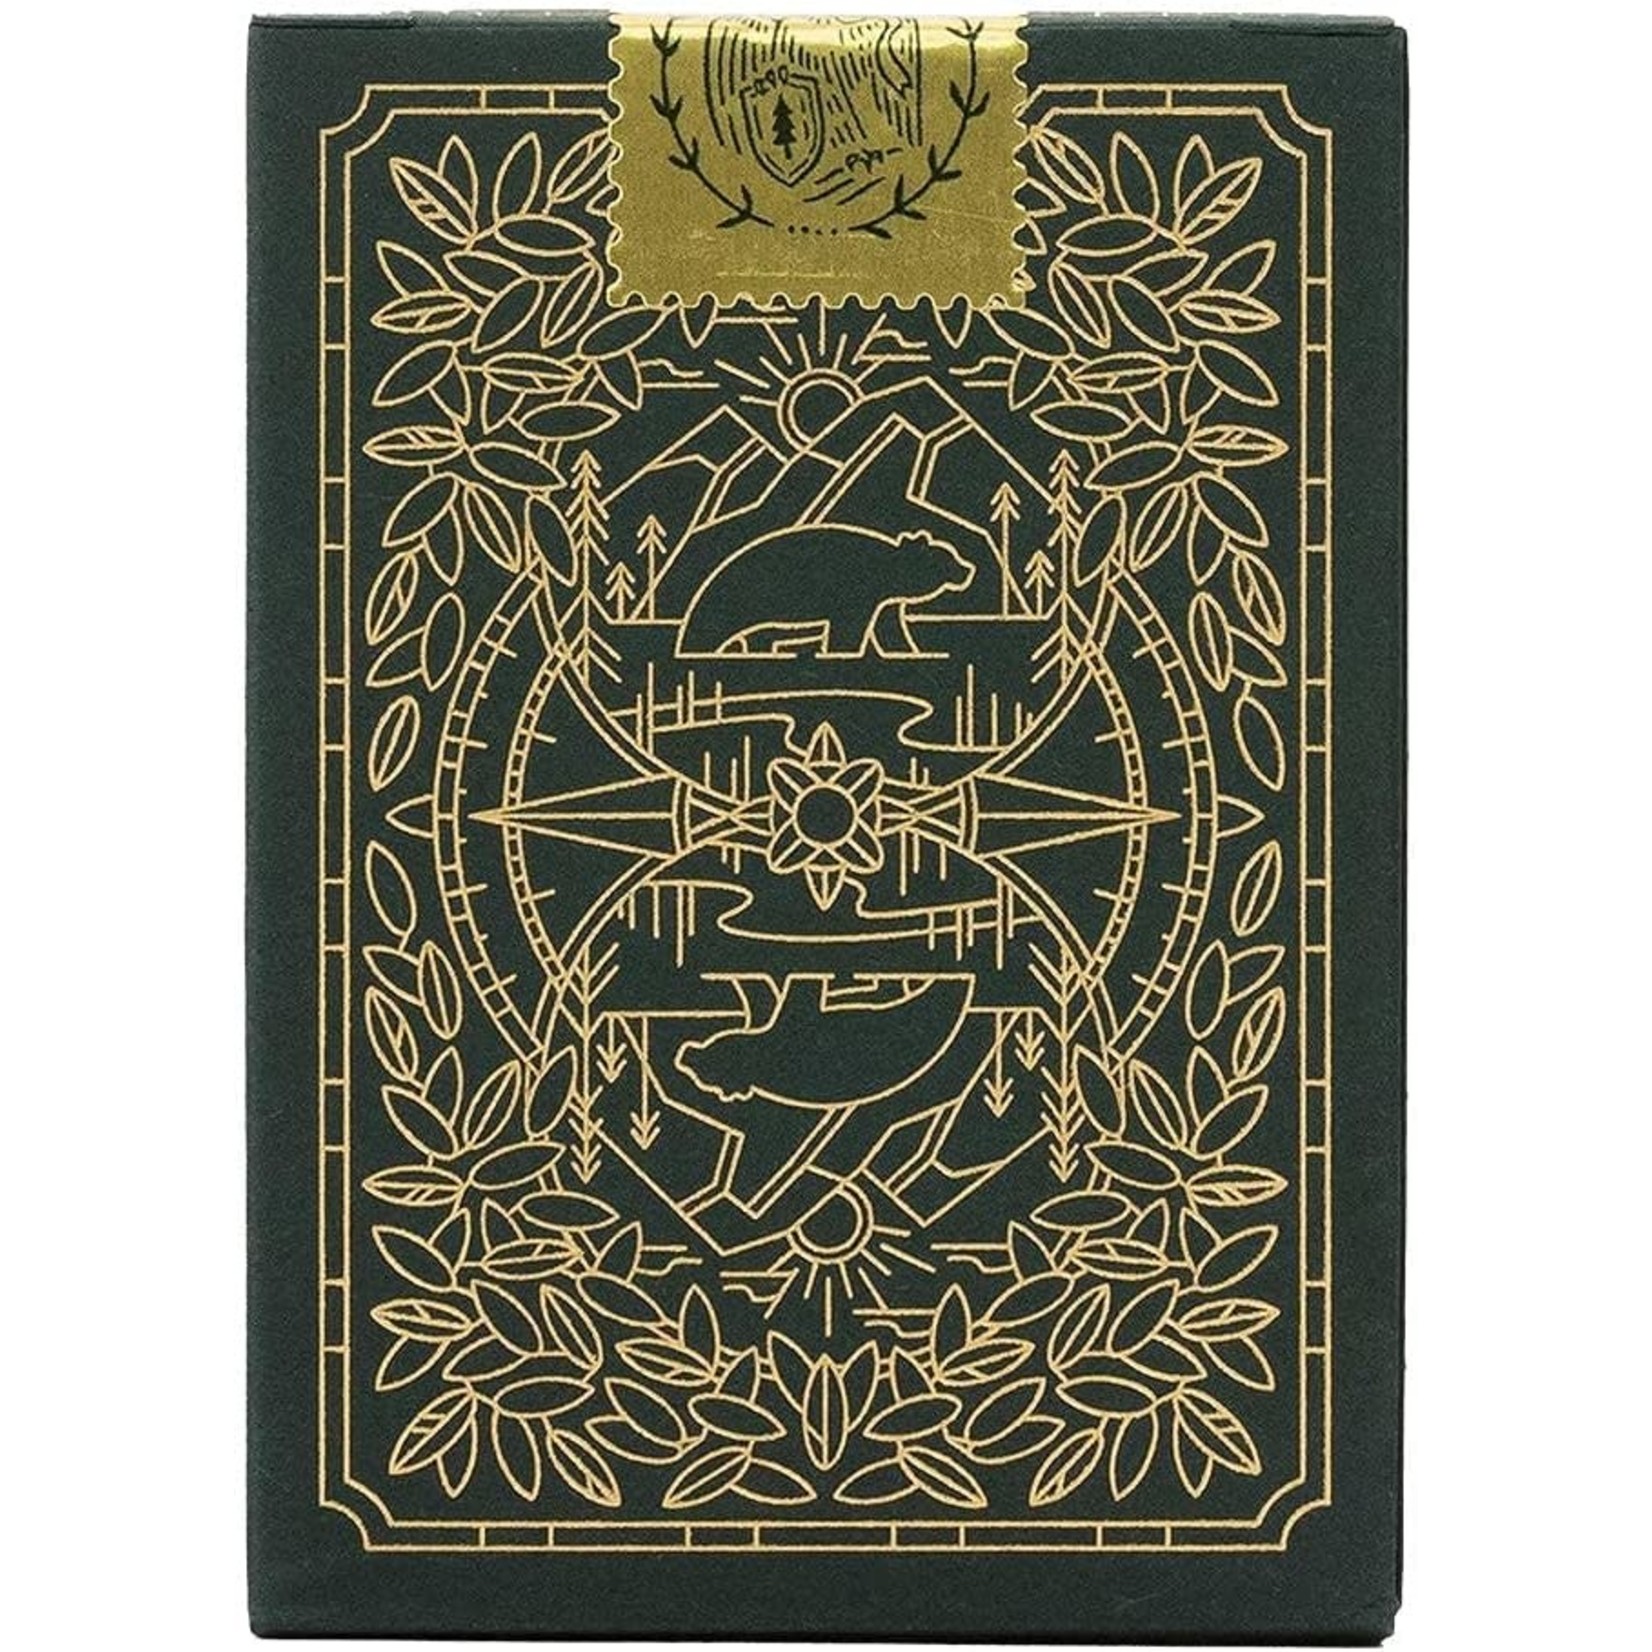 Keymaster Games PARKS: Playing Cards (Green Deck)